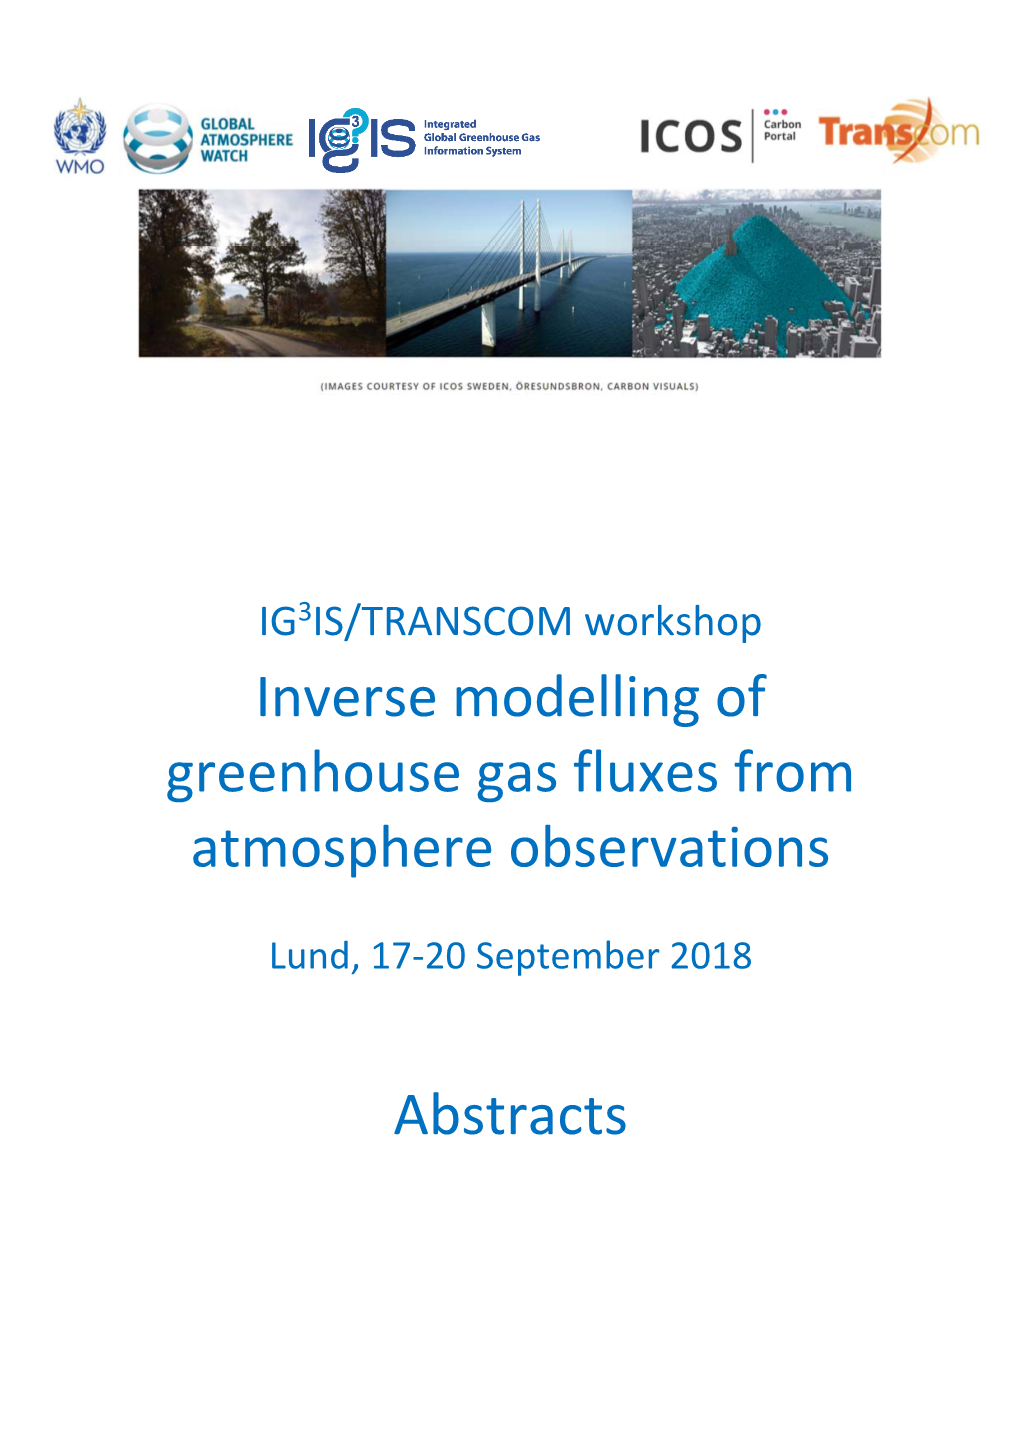 Inverse Modelling of Greenhouse Gas Fluxes from Atmosphere Observations